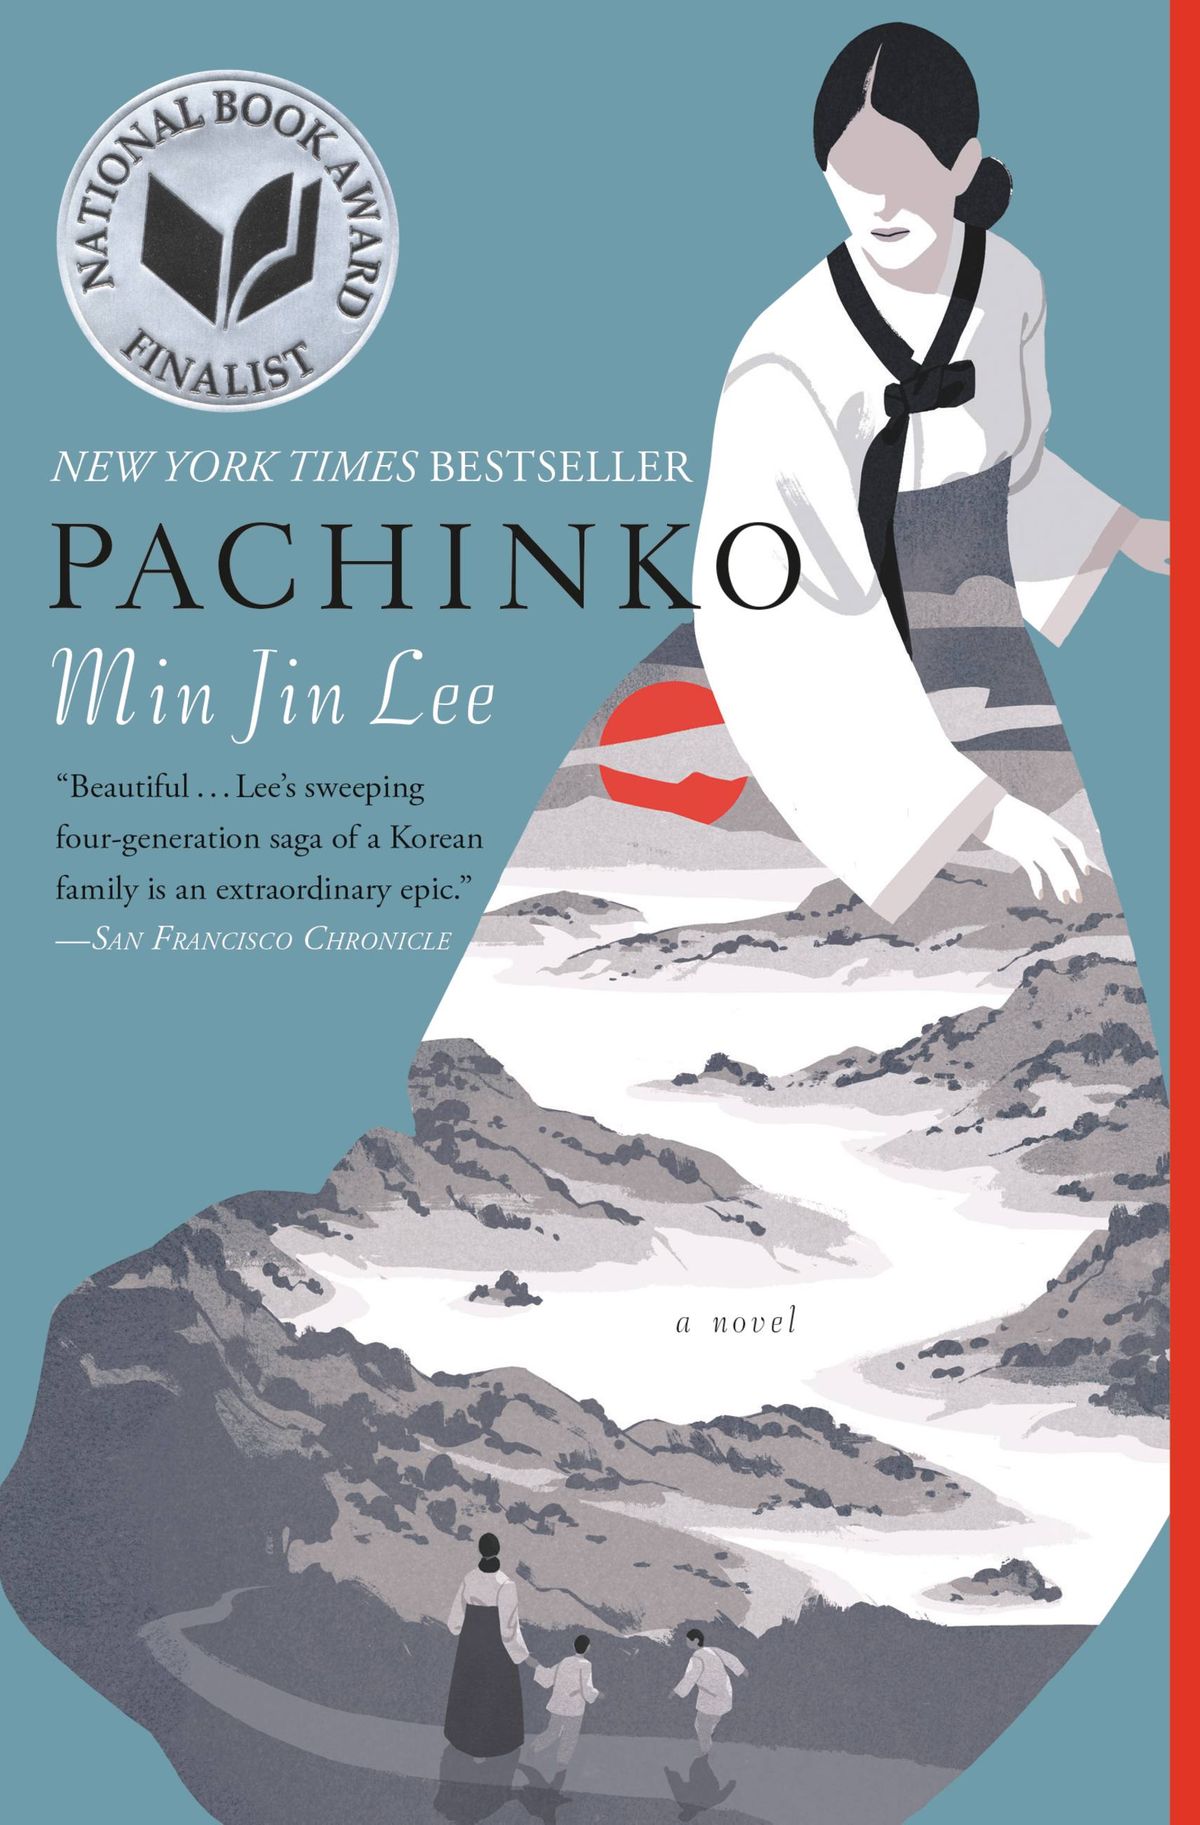 book review on pachinko